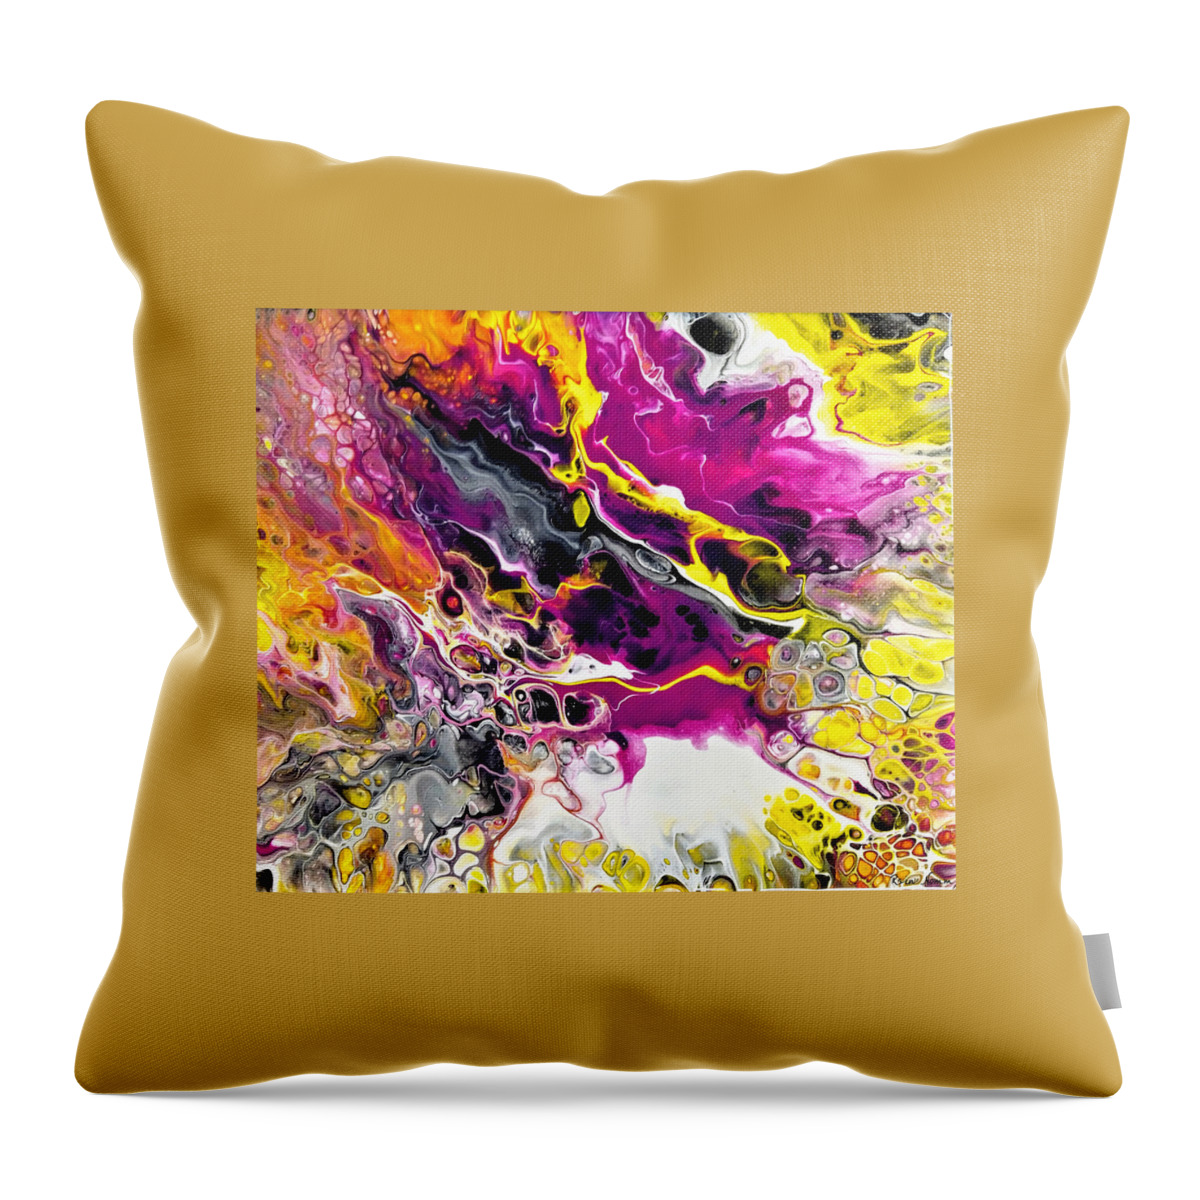  Throw Pillow featuring the painting Fleeting Glory by Rein Nomm